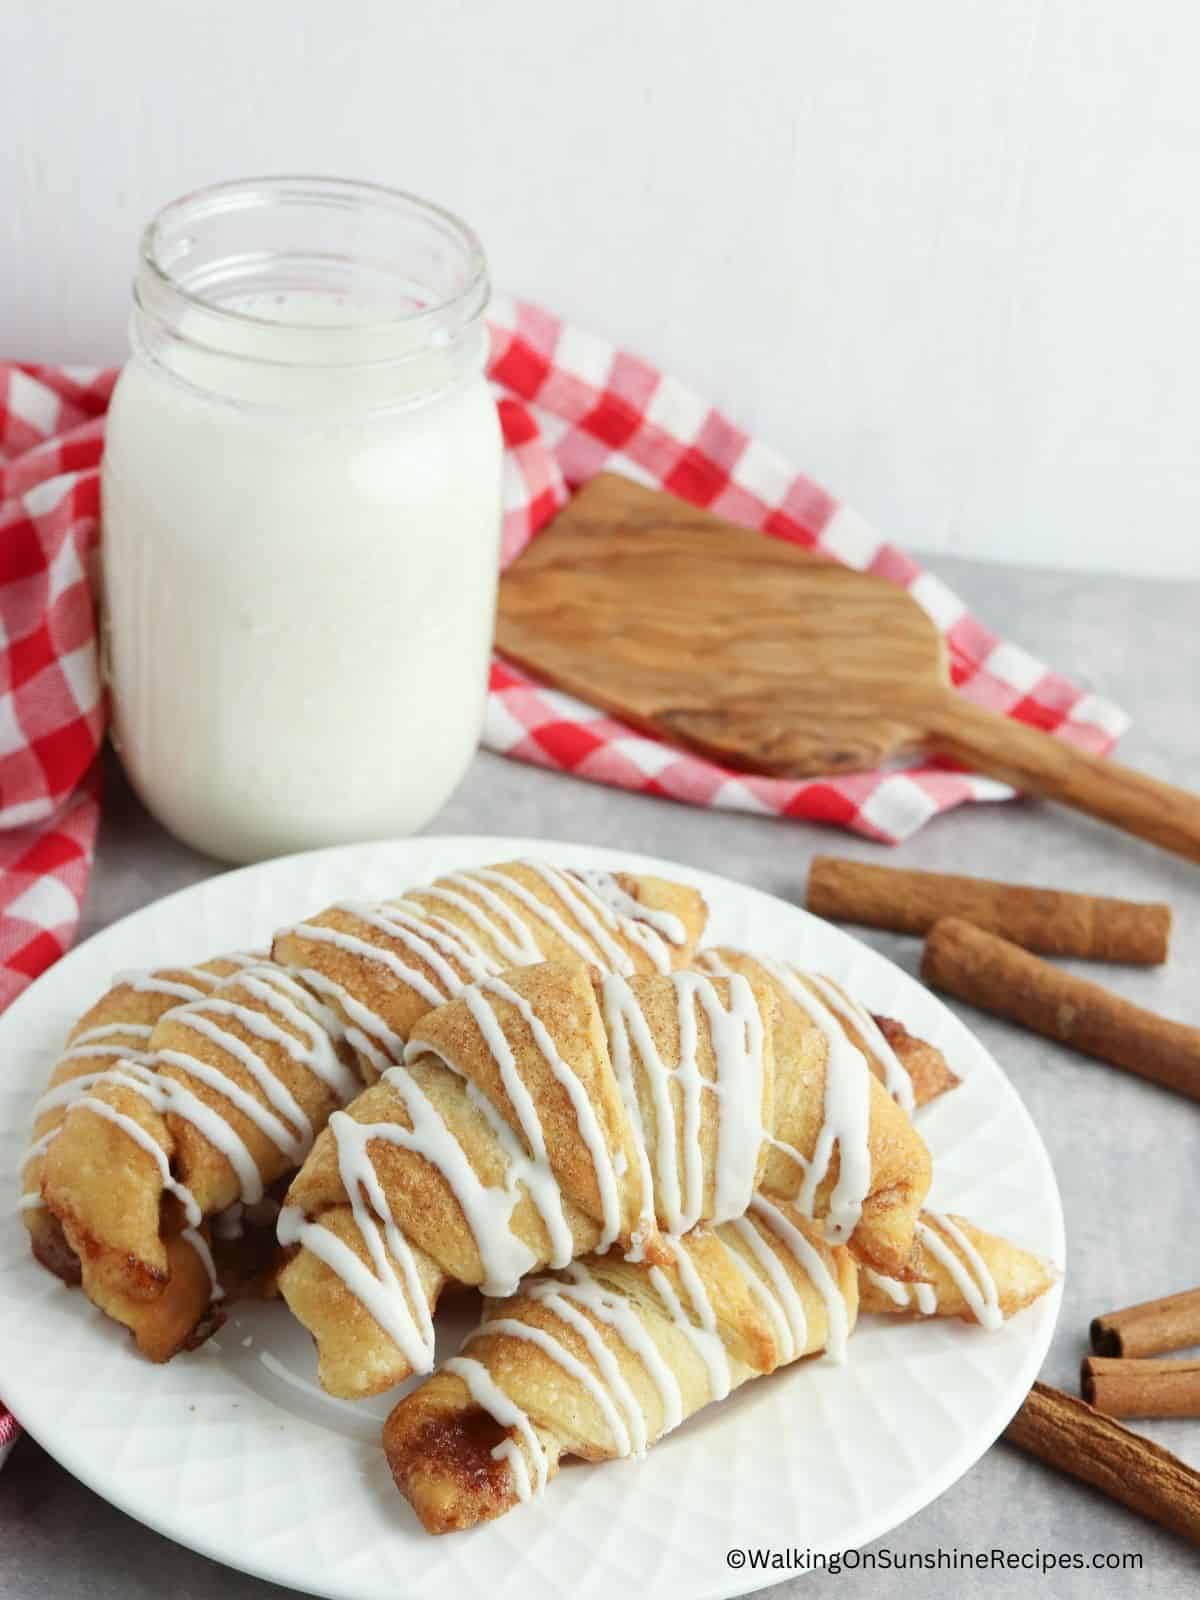 cinnamon crescent rolls with cream cheese frosting drizzle on white plate with cinnamon sticks and glass of milk.